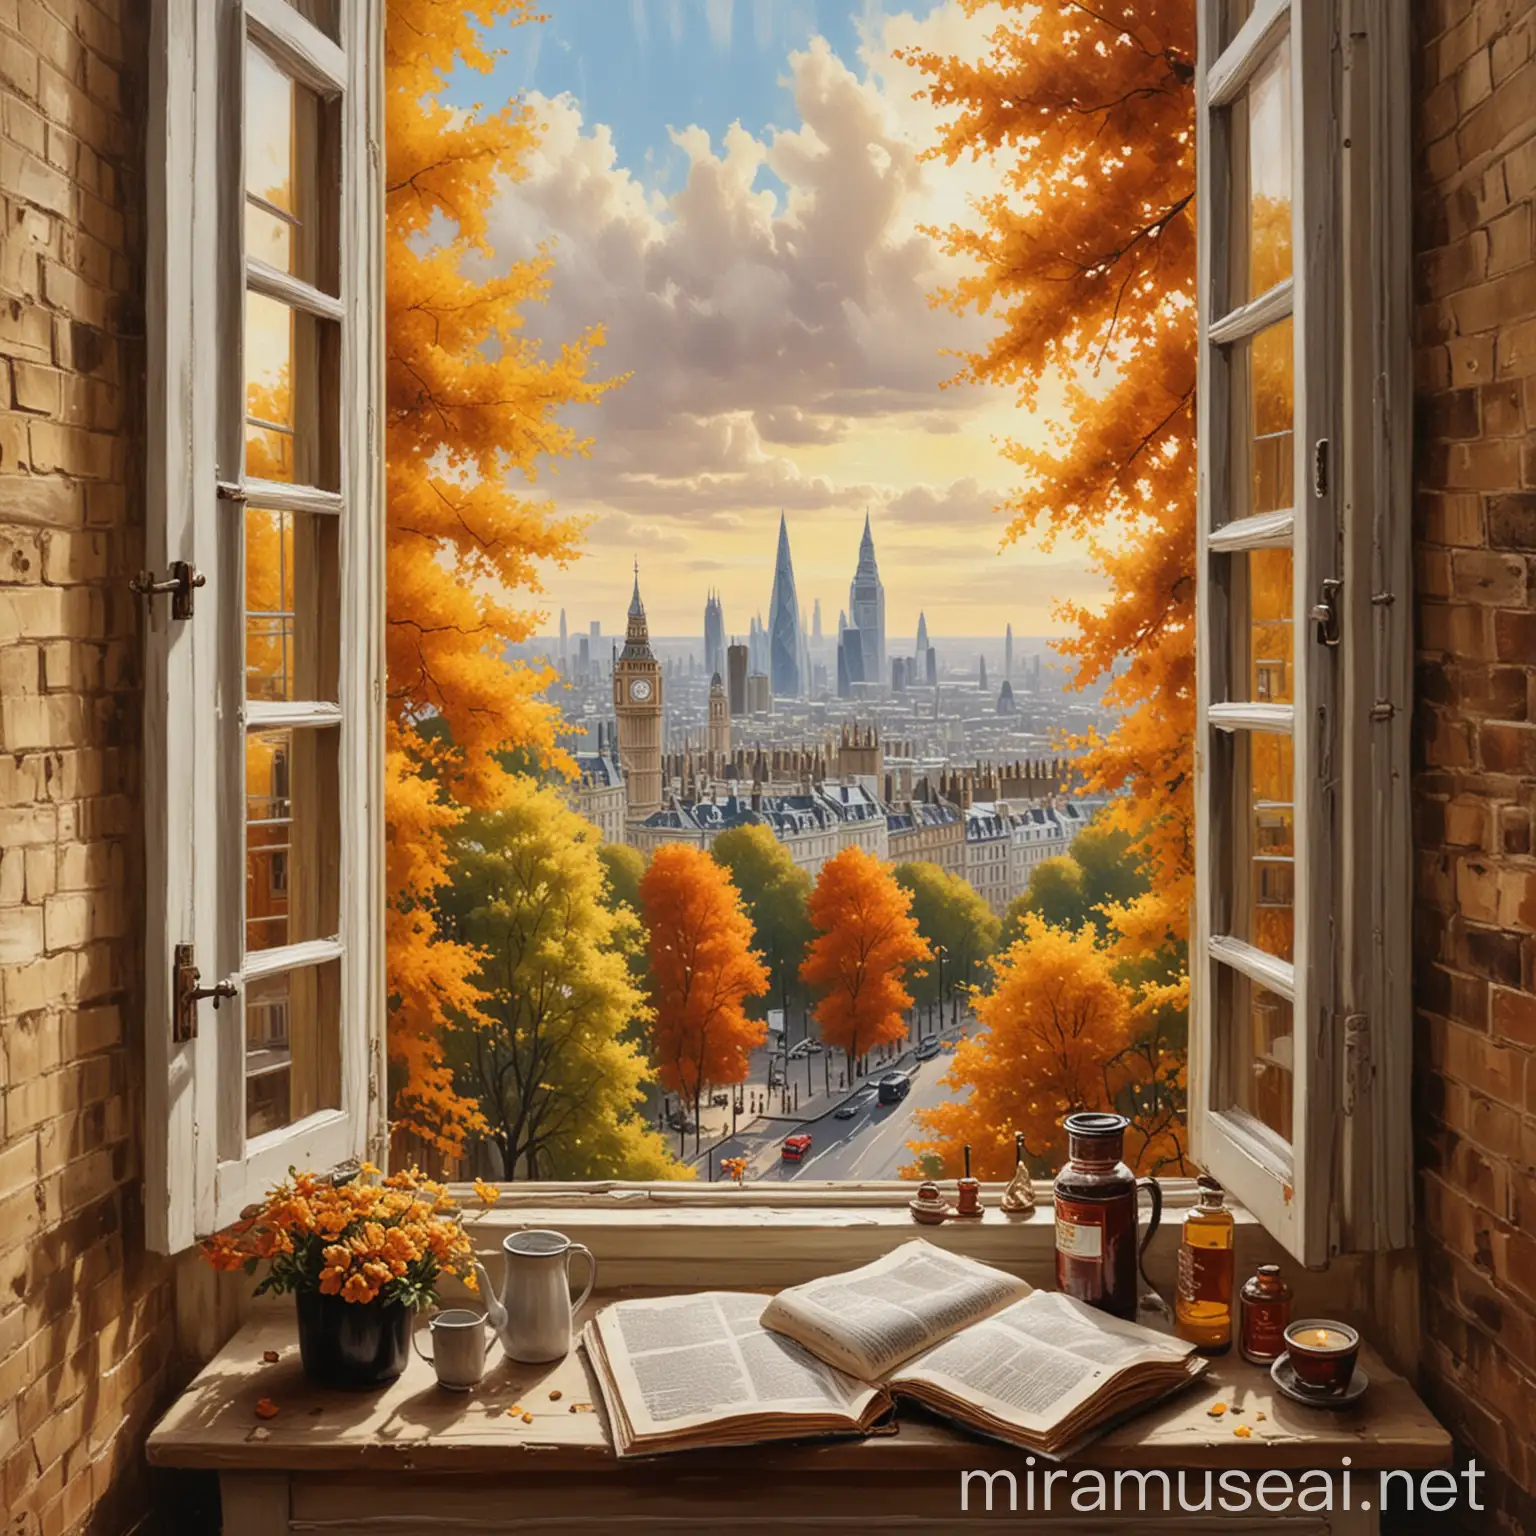 generate a landscape oil painting whicl involves london view in fall, street, home, window, book and use mostly yellowish colors